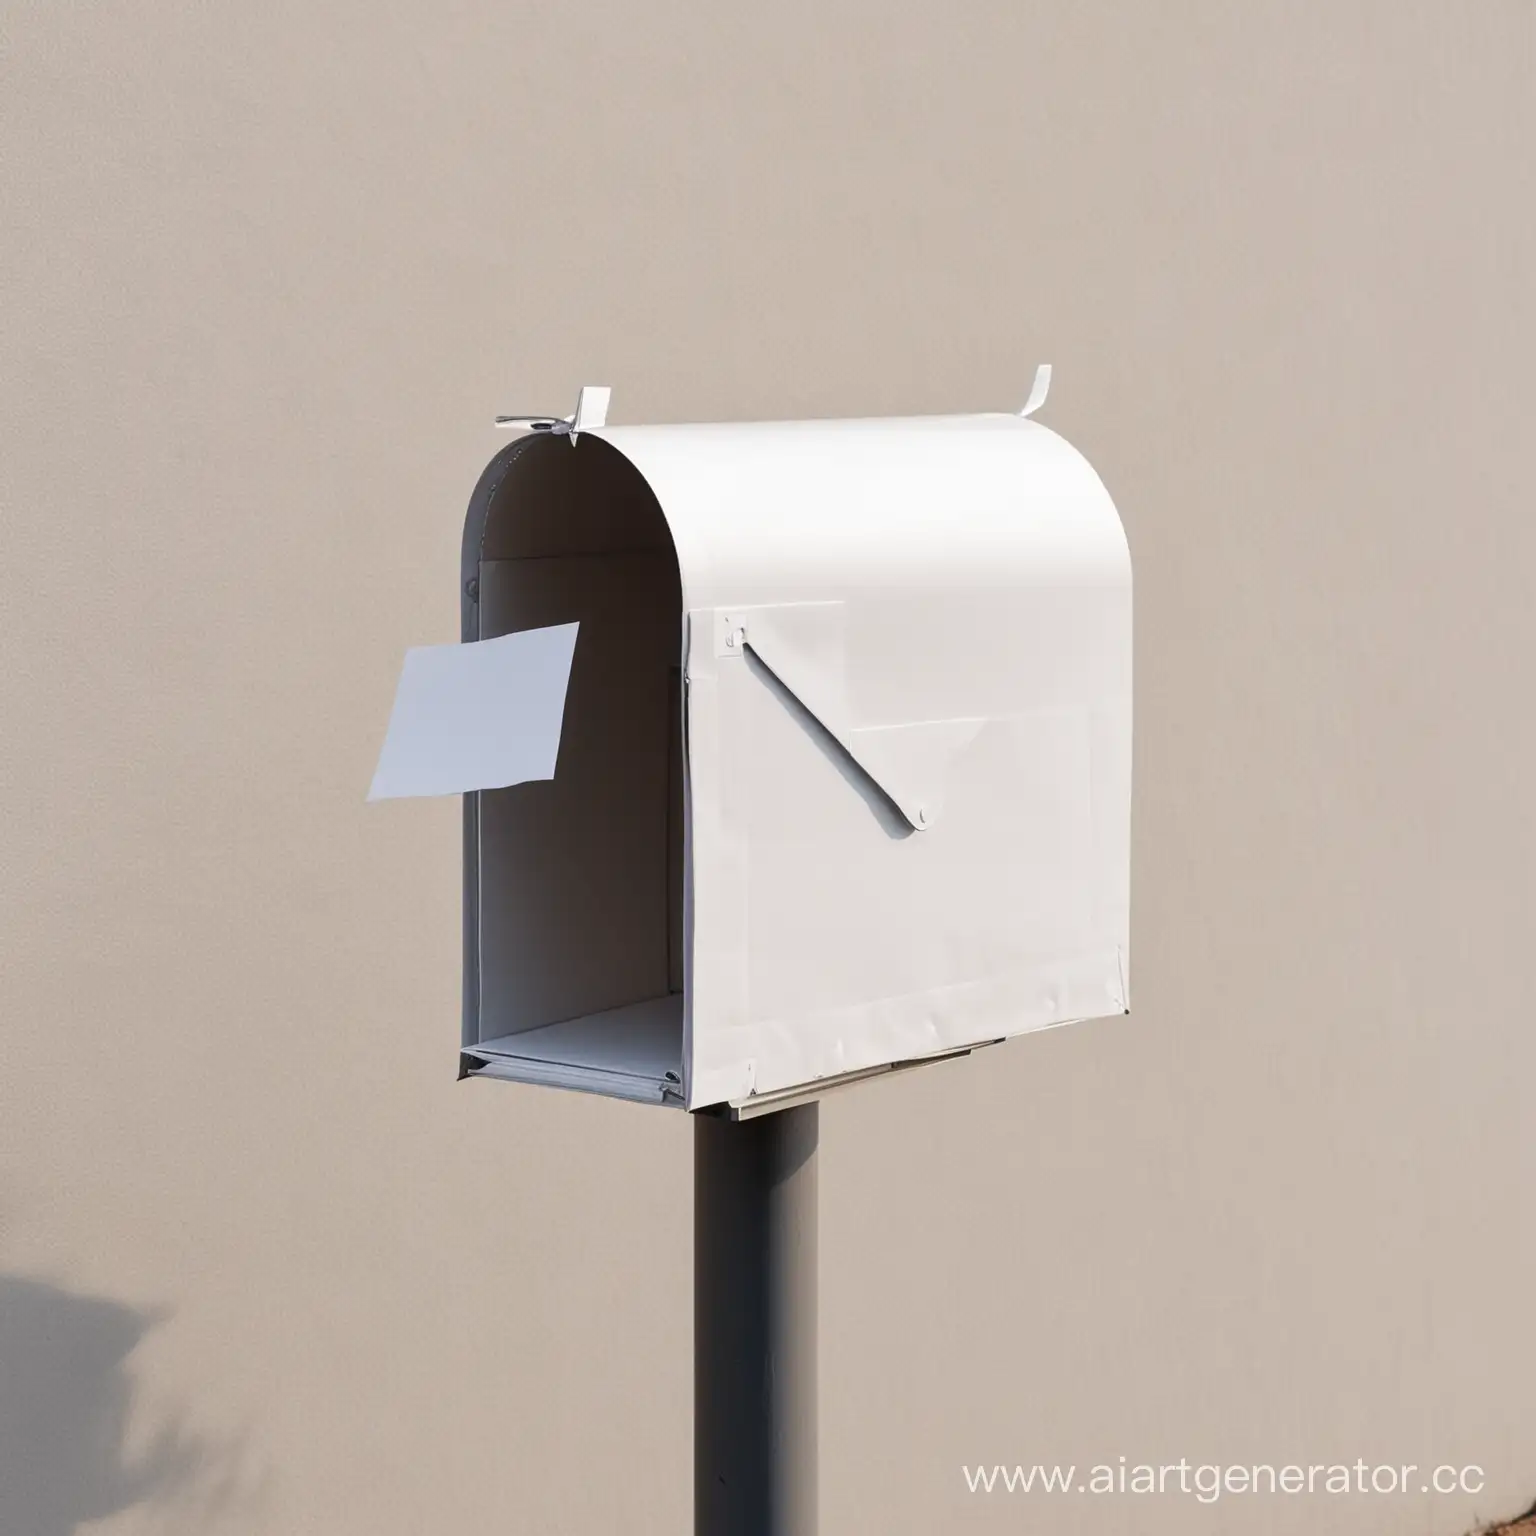 Letter-or-White-Sheet-Sticking-Out-of-Mailbox